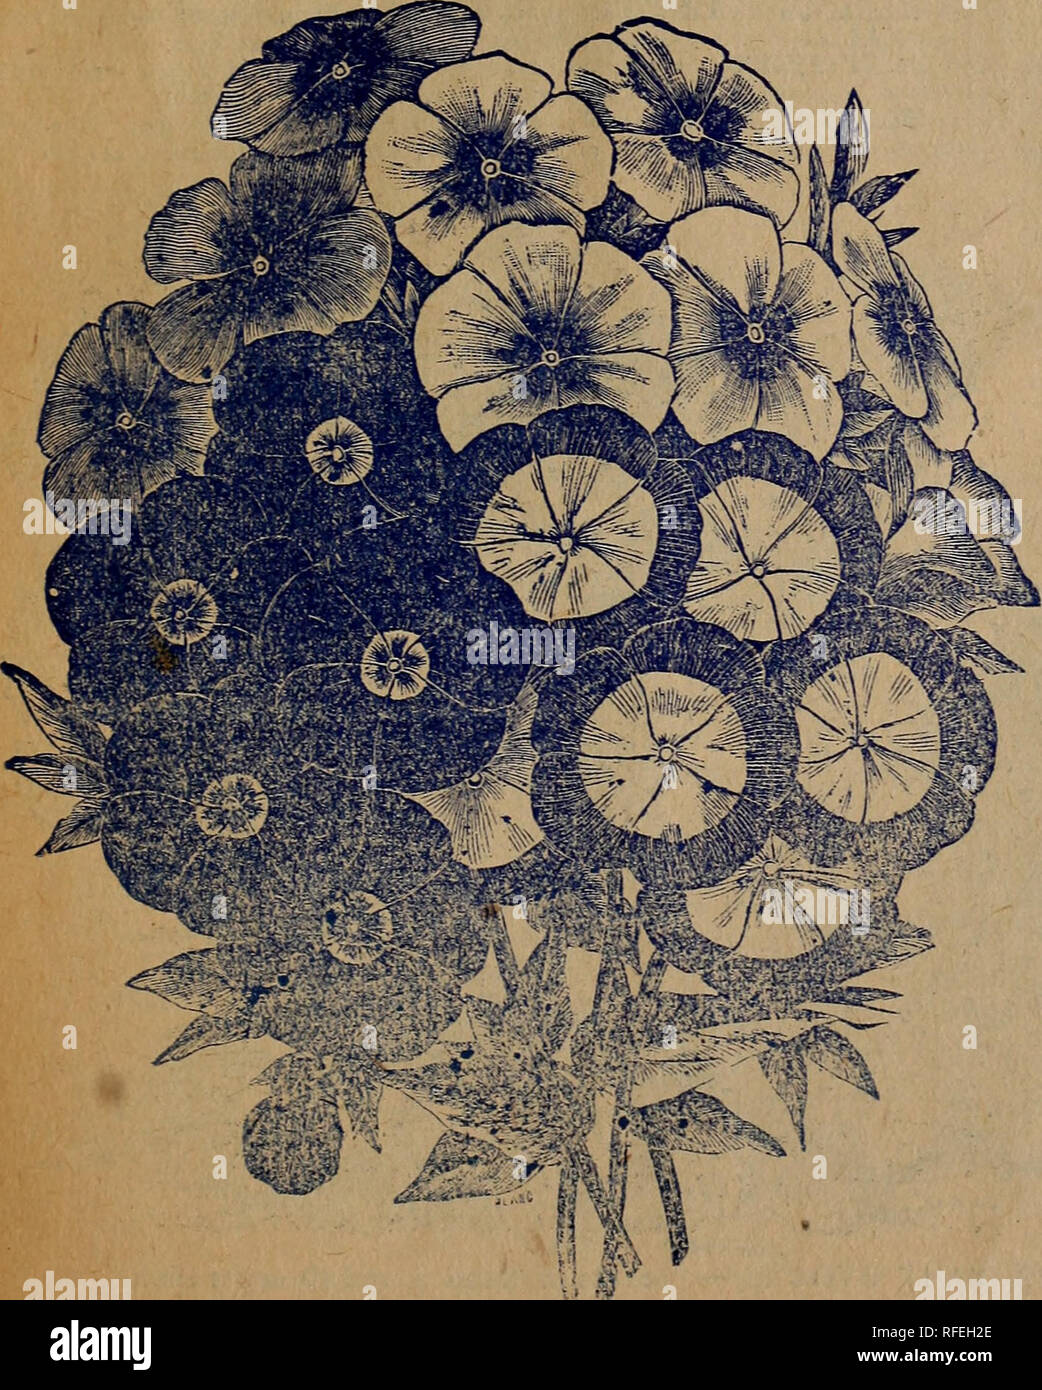 . Bell's seed catalogue : best and cheapest seeds that grow. Nursery stock New York (State) Catalogs; Vegetables Seeds Catalogs; Flowers Seeds Catalogs; Bulbs (Plants) Catalogs. 2S White Cupid. Spreading or trailing form, nclies high. pkt. 4 cts. ounce 10 cts. 4129 Pink Cupid. 6 in. high, pink and white; Blossoms same as Paint- ed Lady or the Blanche Ferry Sweet Peas. pkt. 4 cts. oz. 15 cts. ^&quot;Pkts. of Sweet Peas contain about 75 seeds. Phlo. Dinxminondfr^ The Phlox has every desirable quality for a splendid mass of color and constant display. The colors range trom purest white to deepes Stock Photo